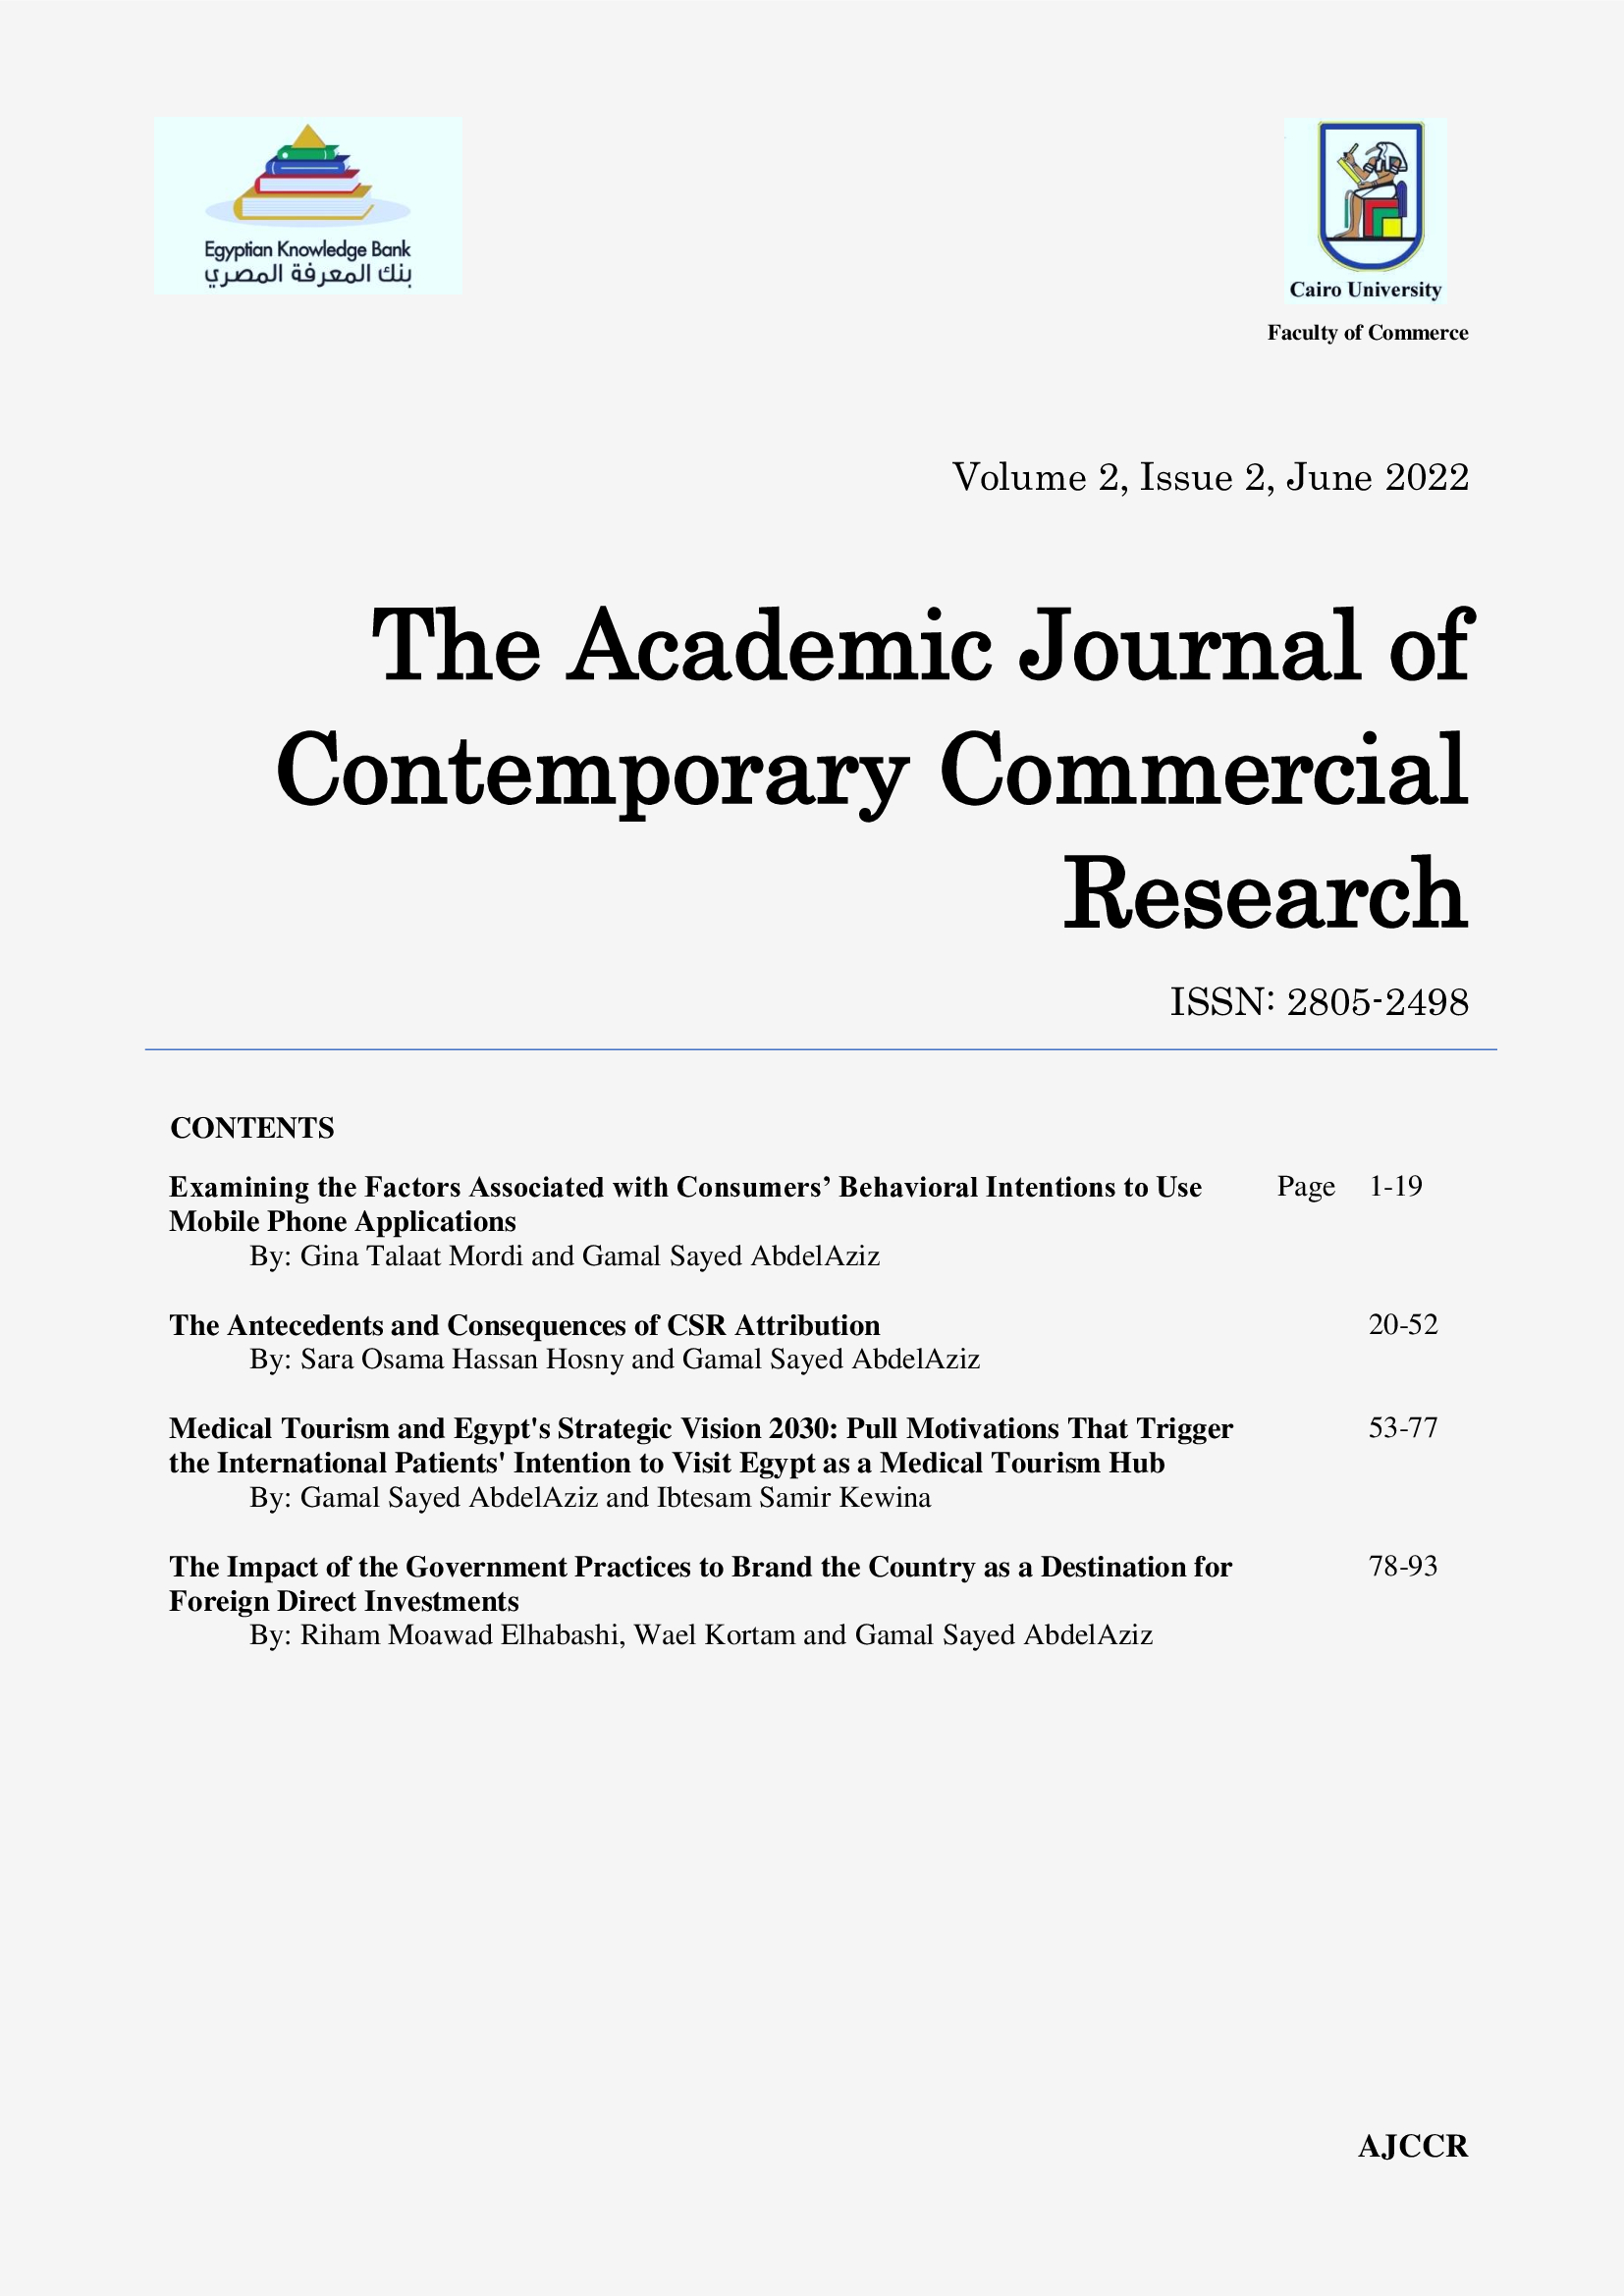 The Academic Journal of Contemporary Commercial Research